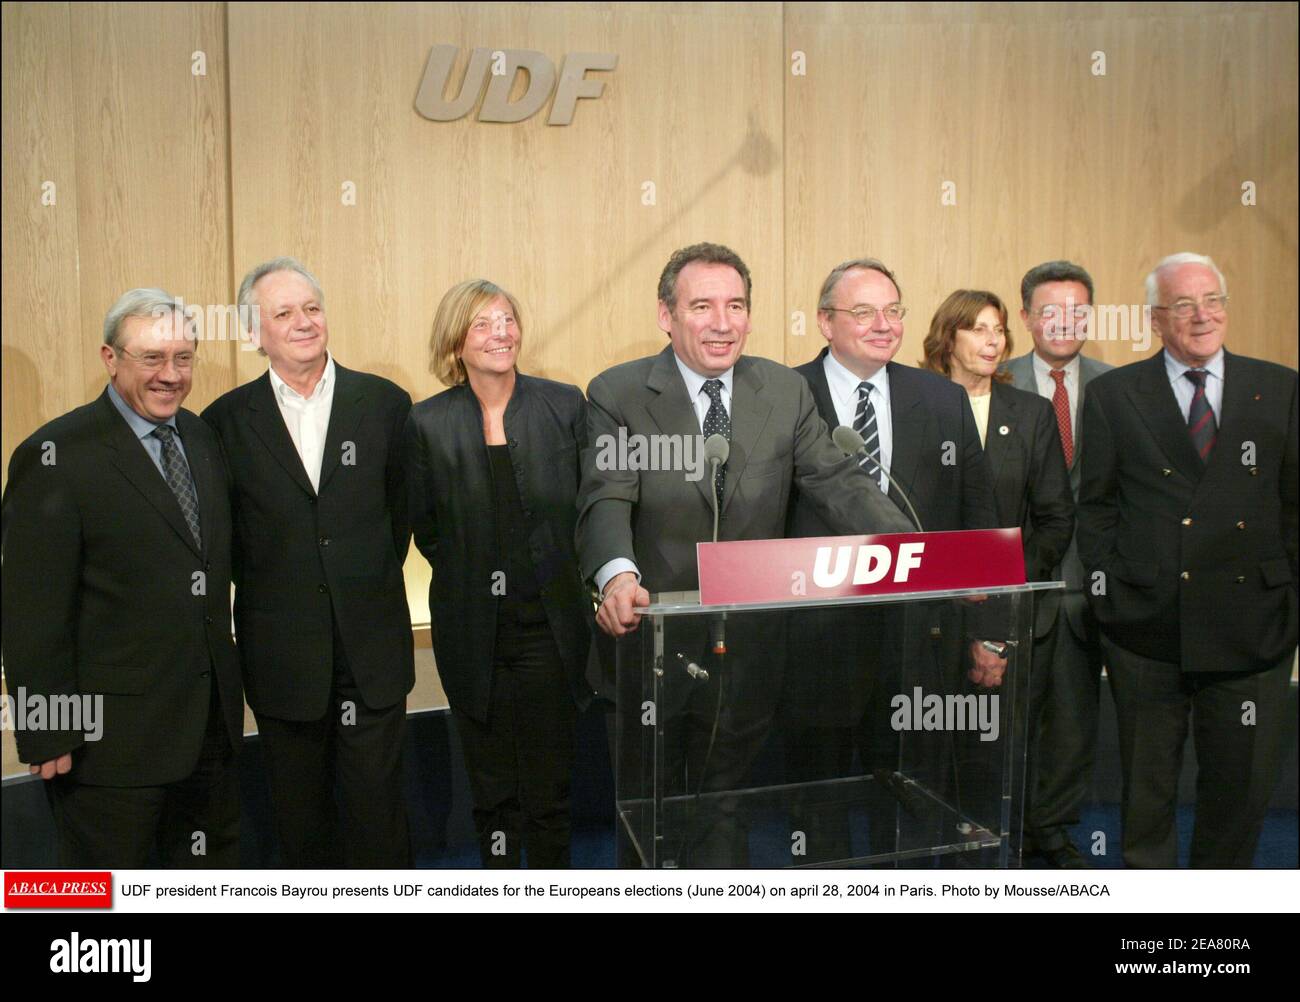 UDF president Francois Bayrou presents UDF candidates for the Europeans elections (June 2004) on april 28, 2004 in Paris. Photo by Mousse/ABACA Stock Photo